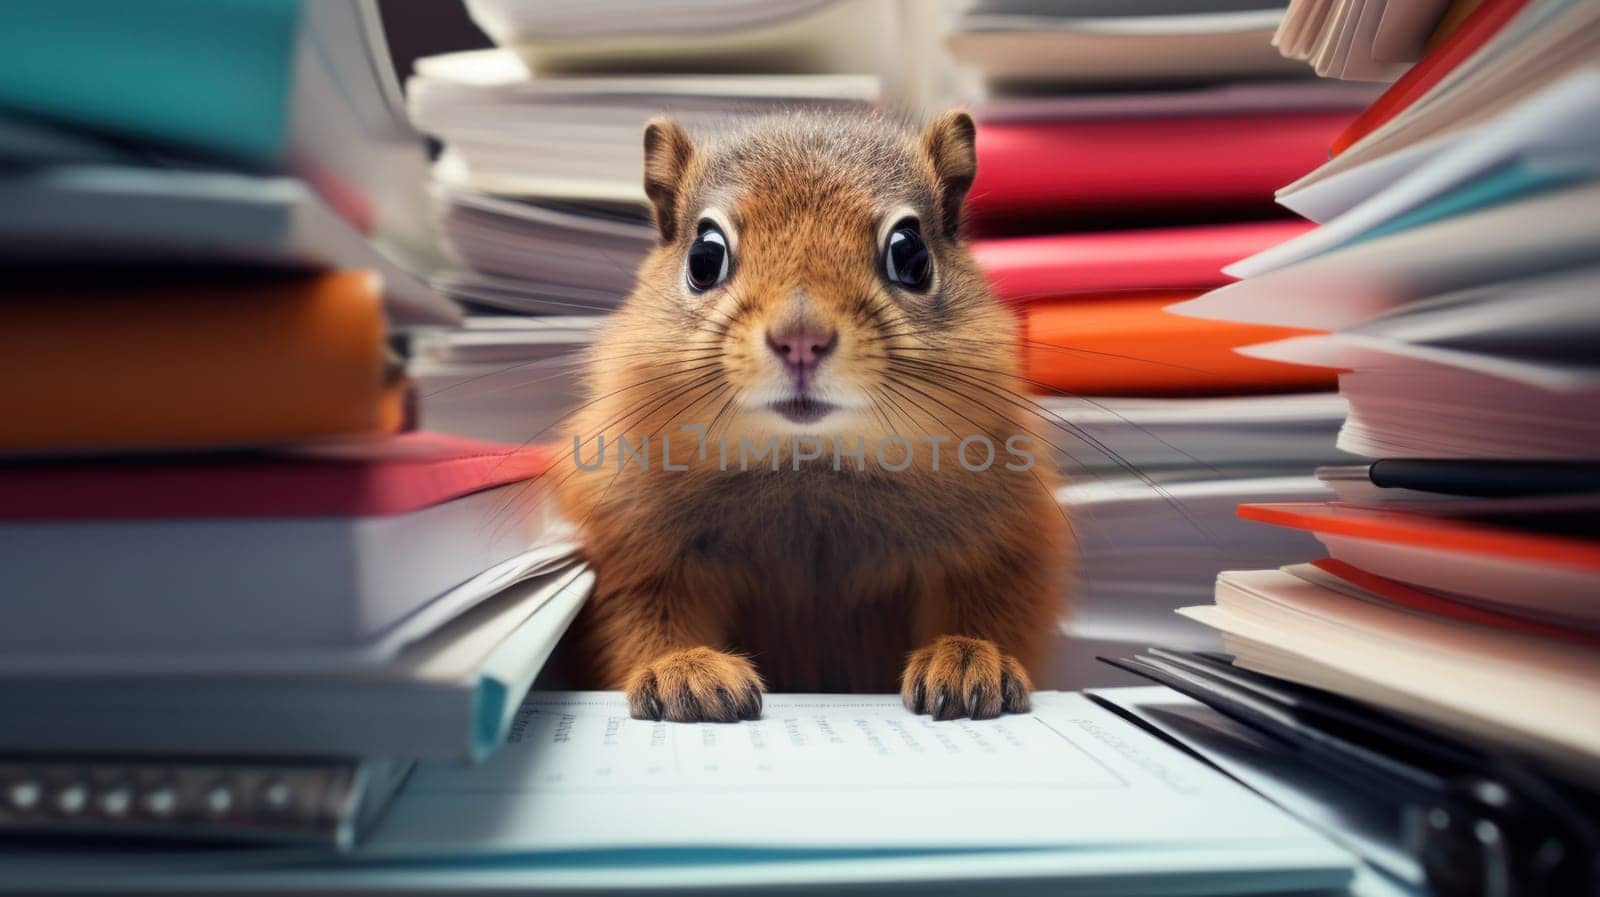 A squirrel sitting on top of a pile of books and papers, AI by starush